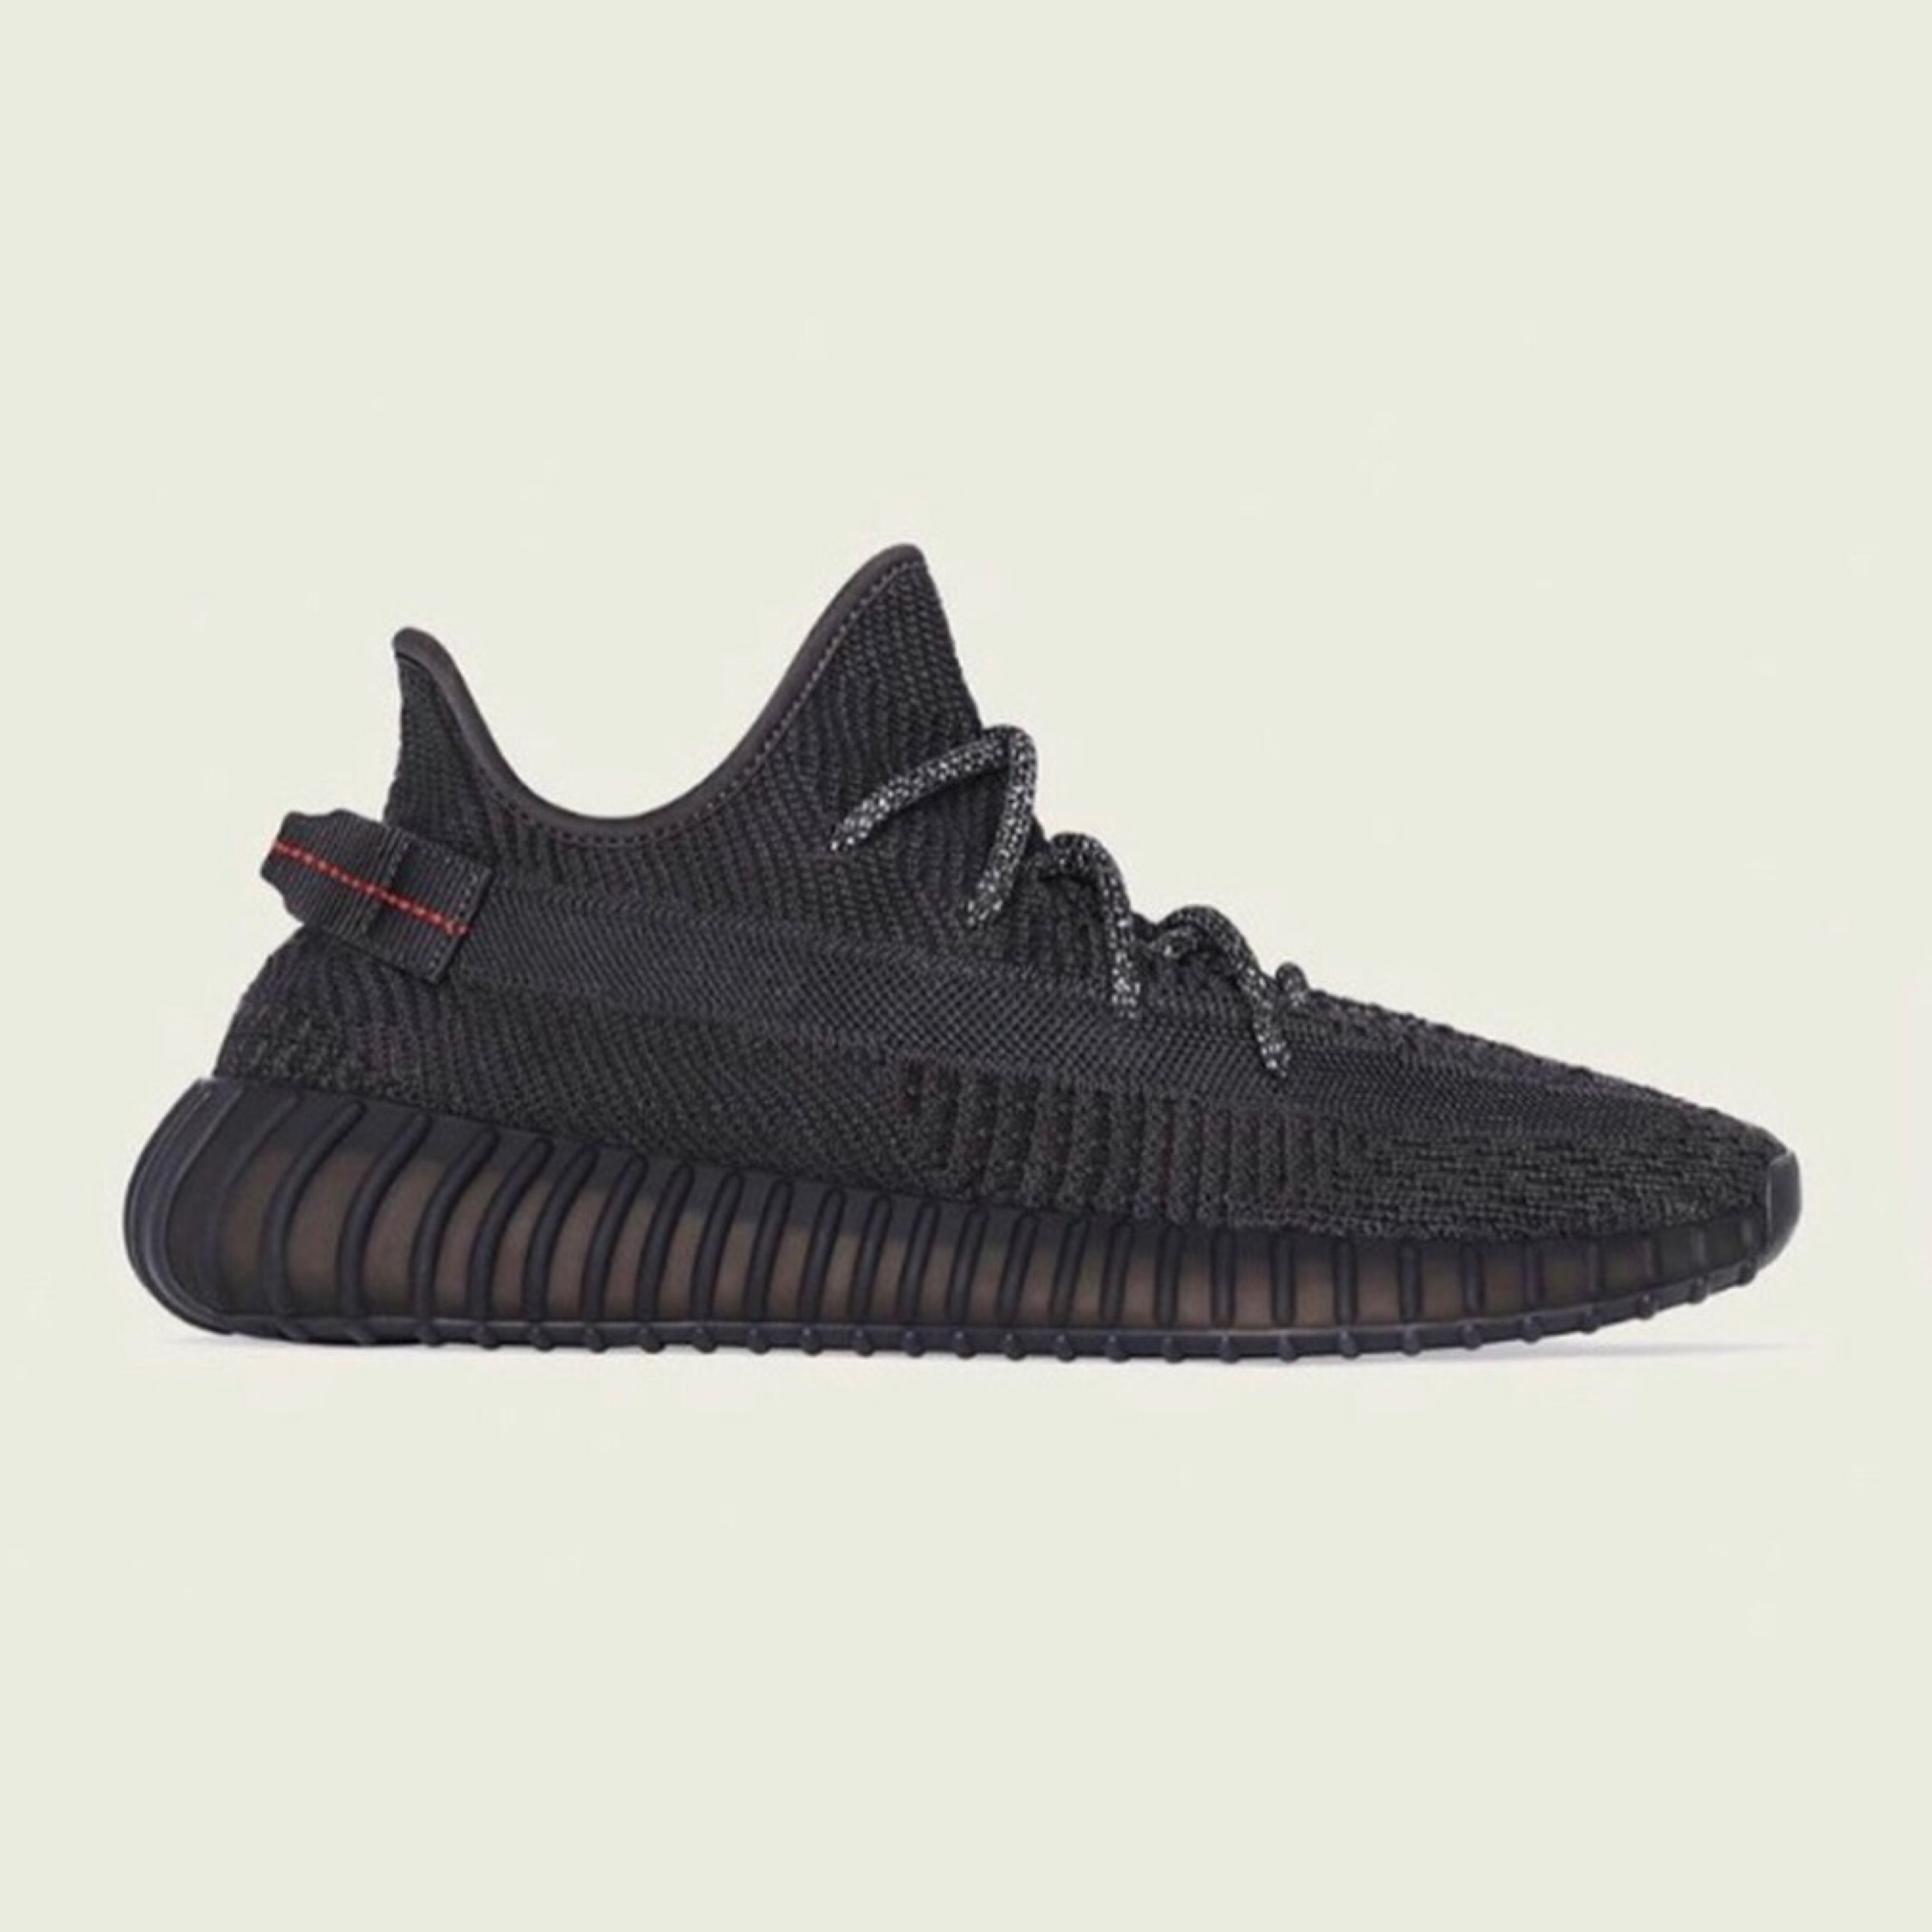 The Adidas Yeezy Boost 350 V2 “Black” Will Be Restocking